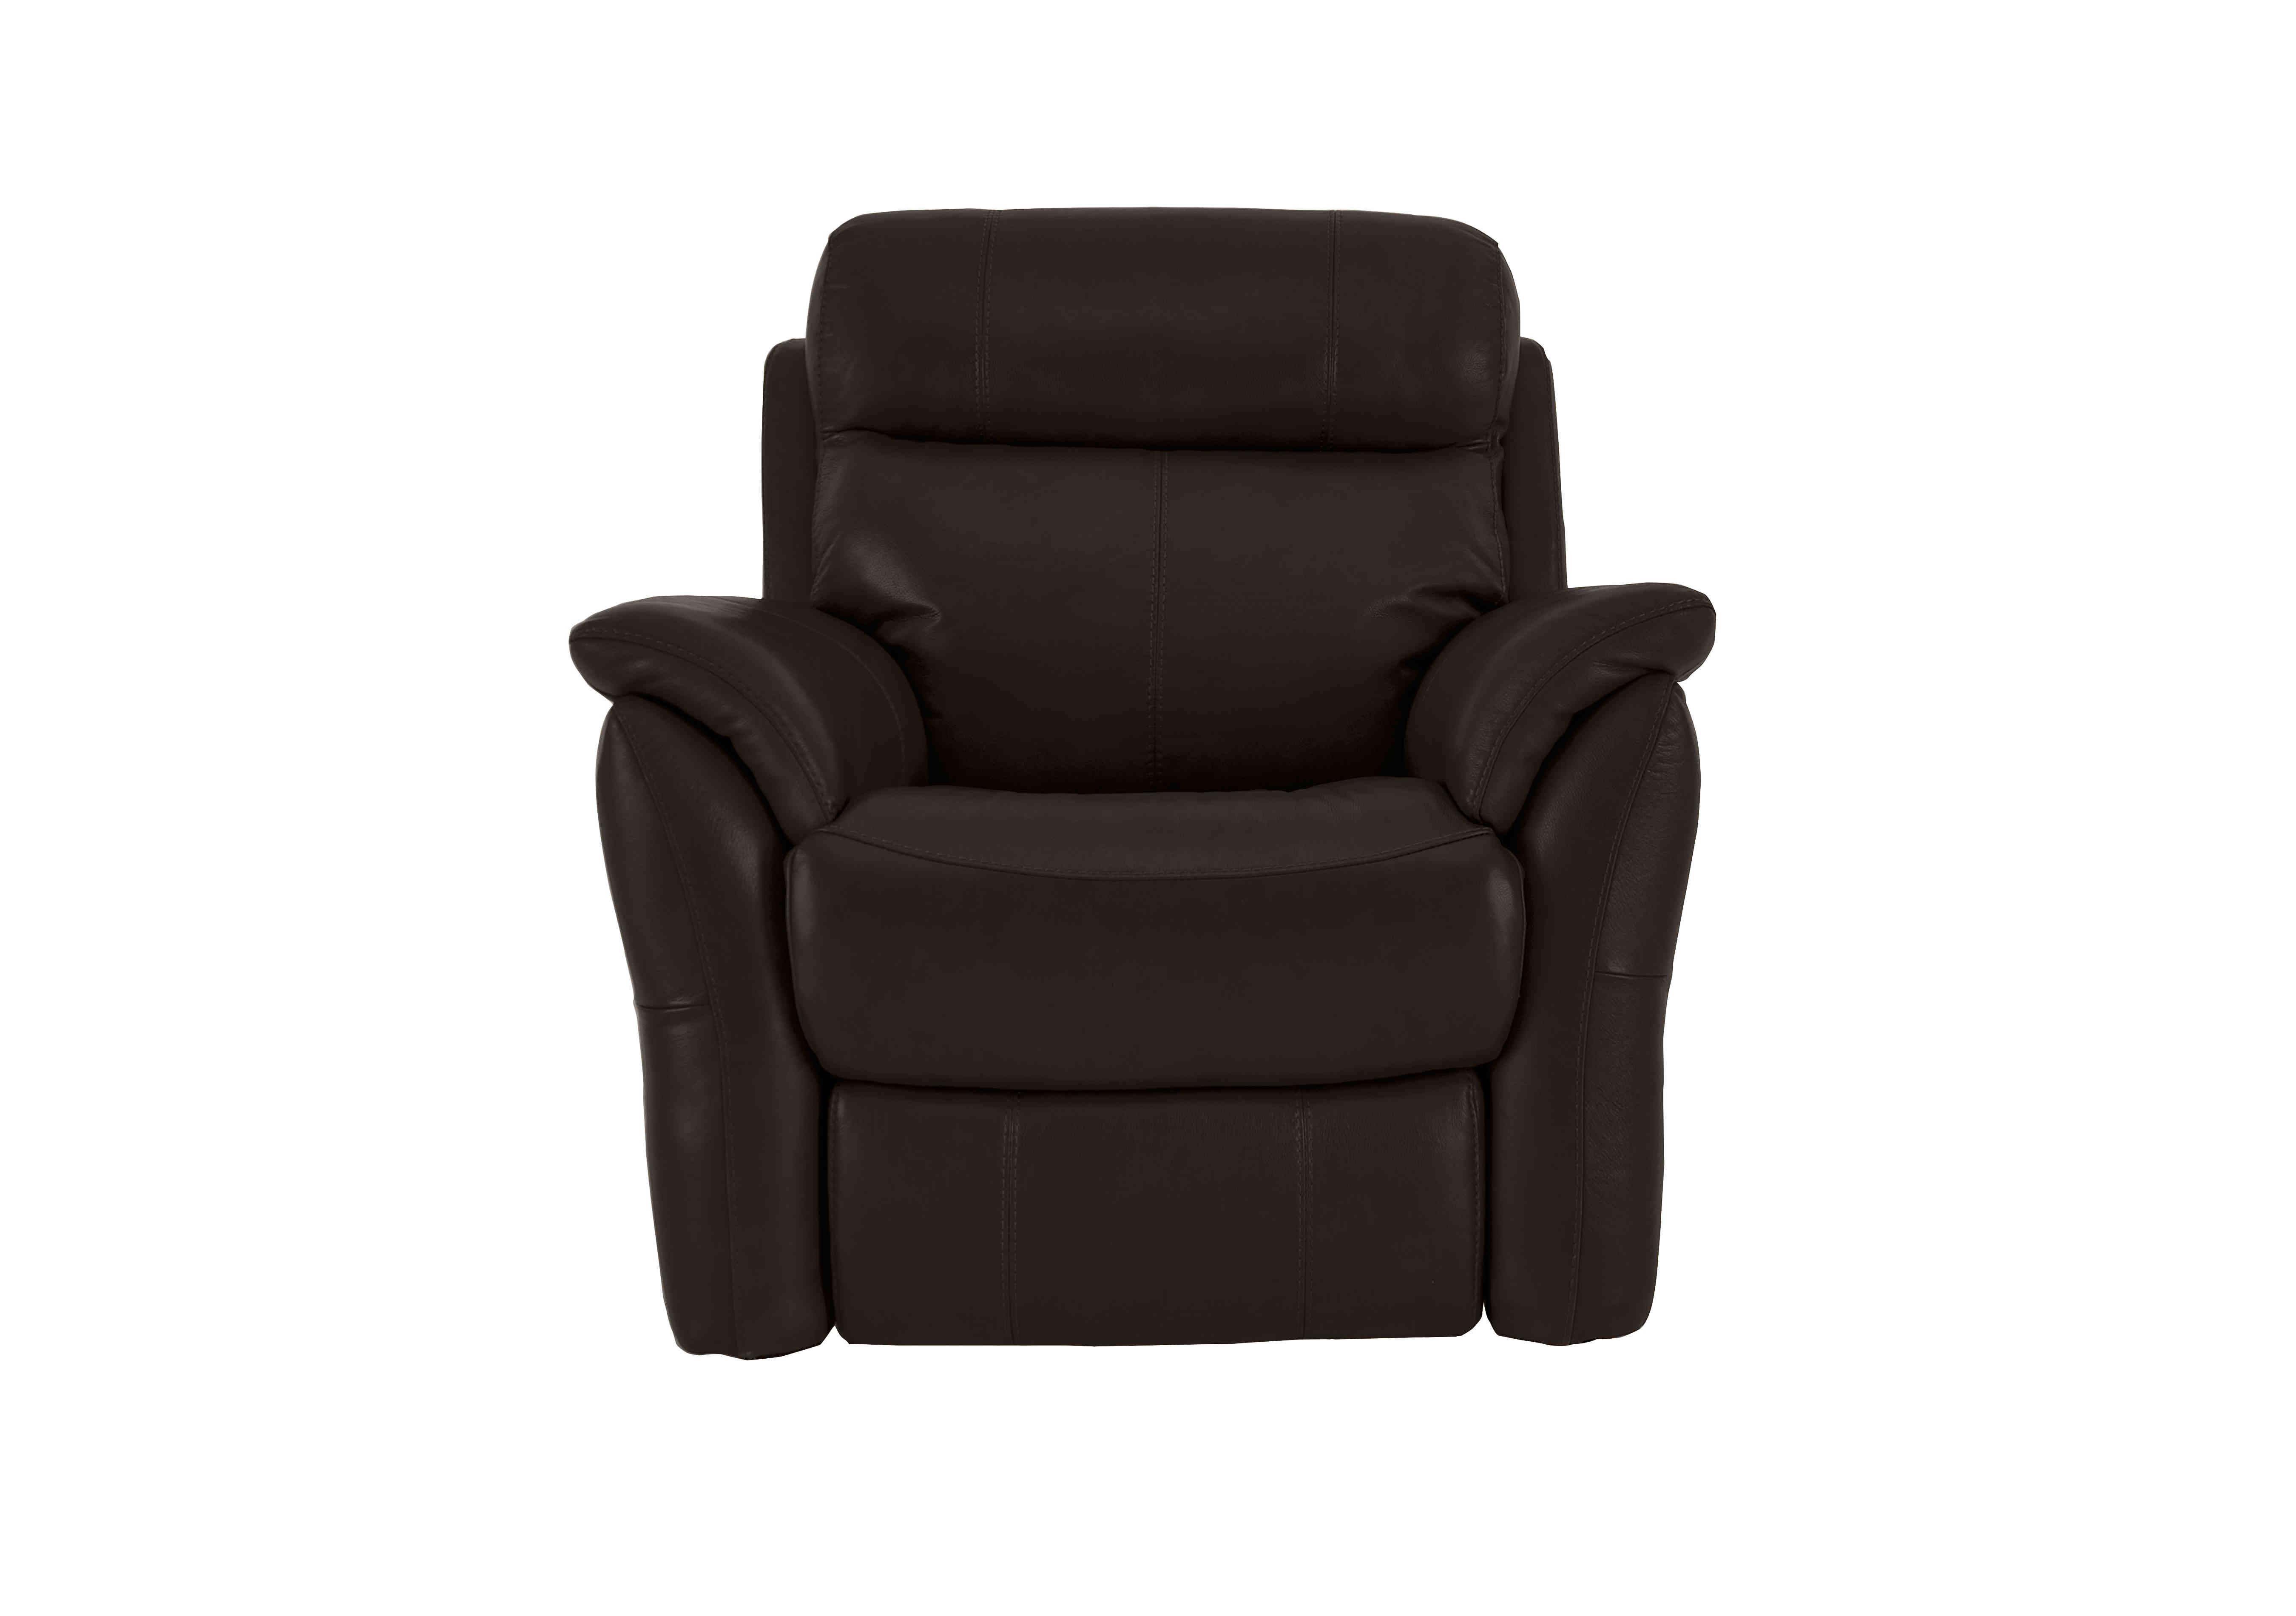 Relax Station Revive Leather Armchair in Bv-1748 Dark Chocolate on Furniture Village